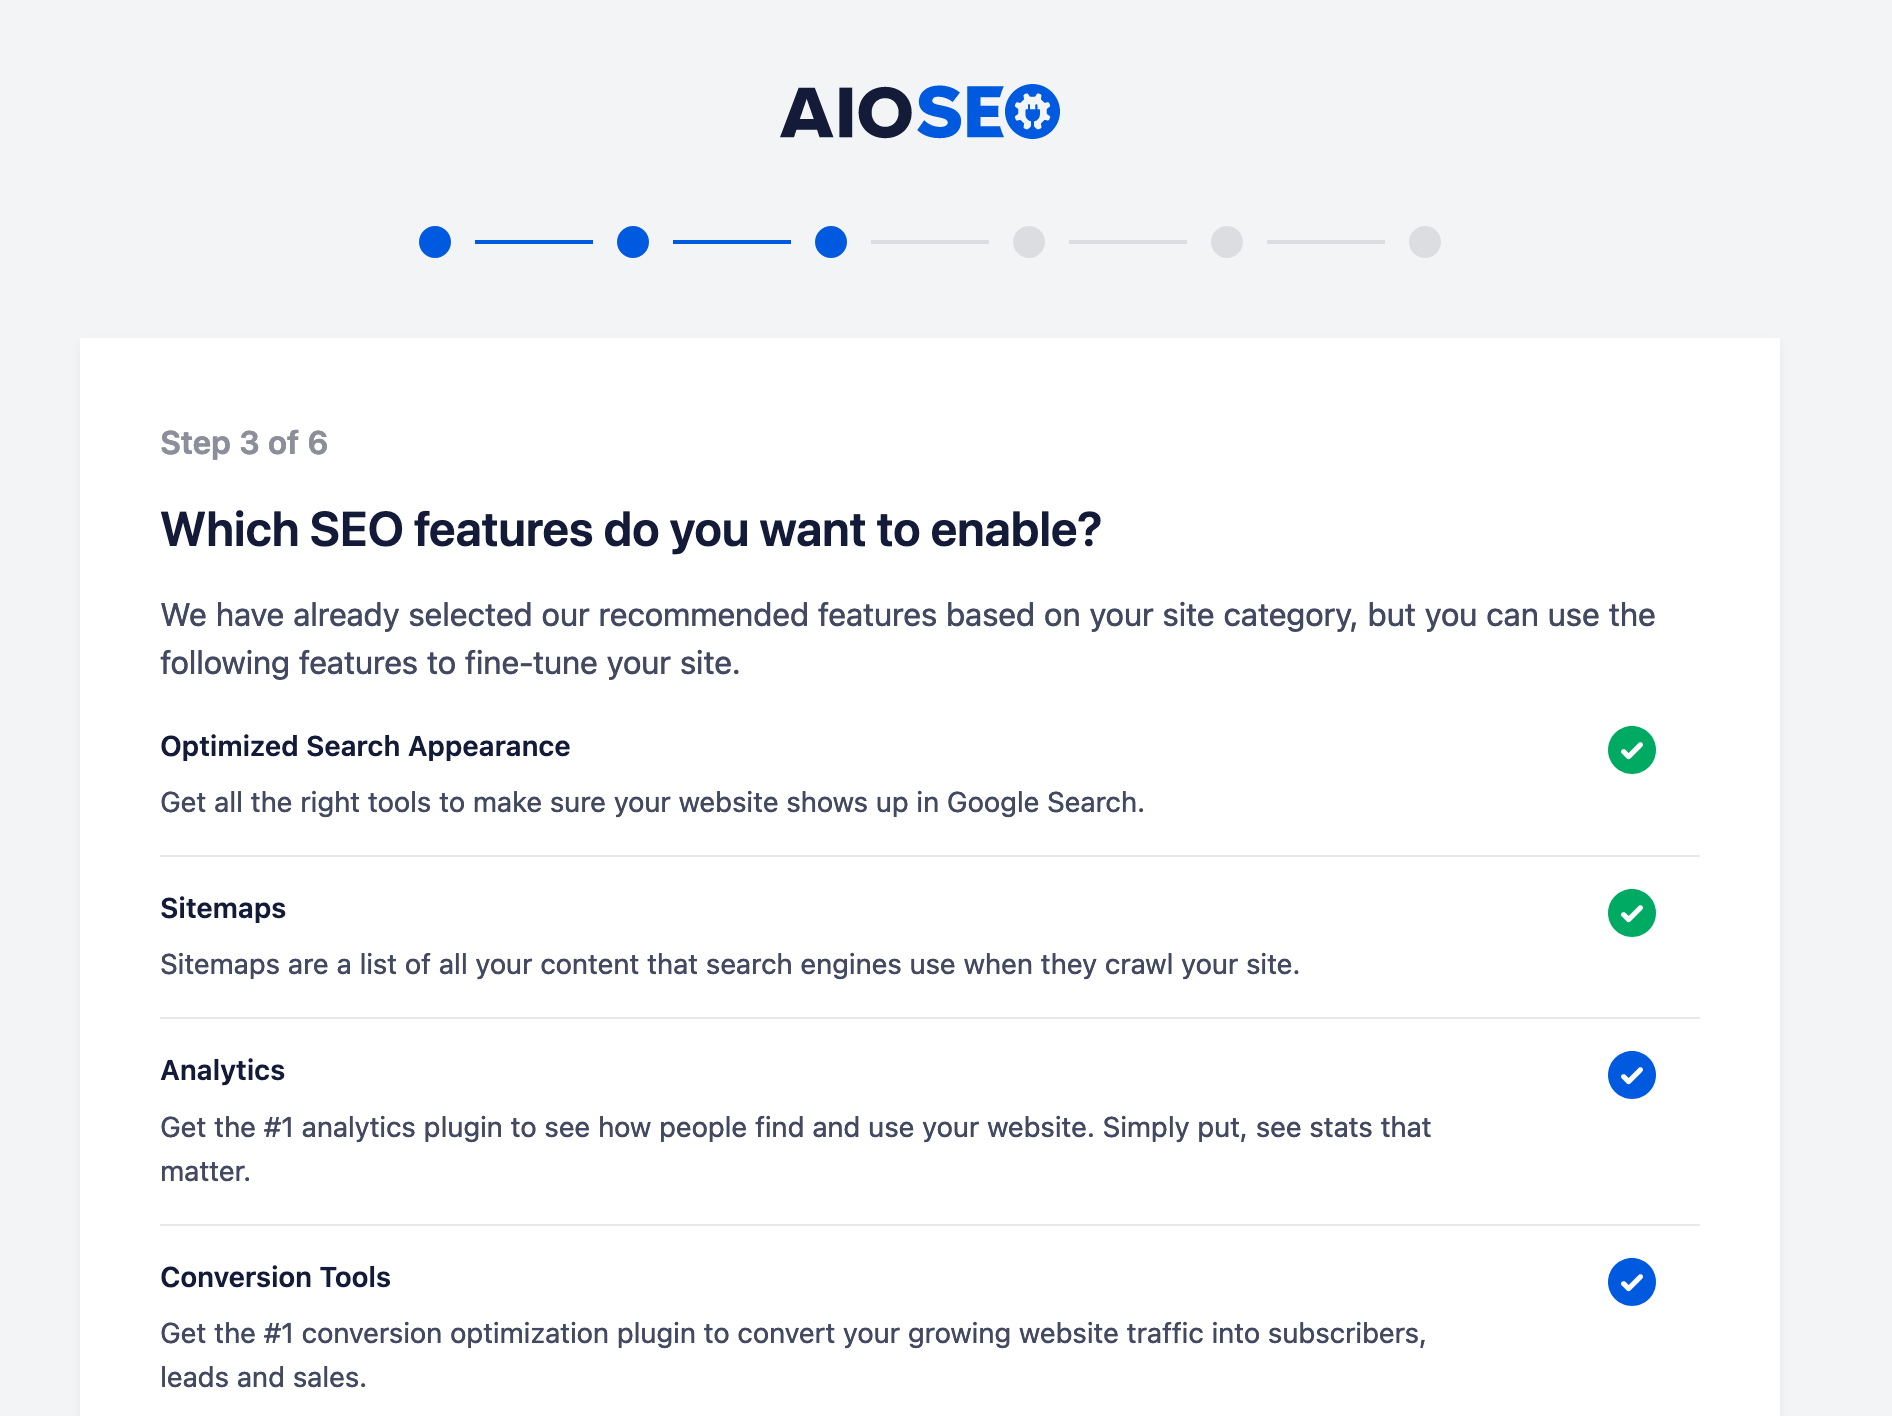 You can choose which SEO features to enable in the AIOSEO configuration wizard.